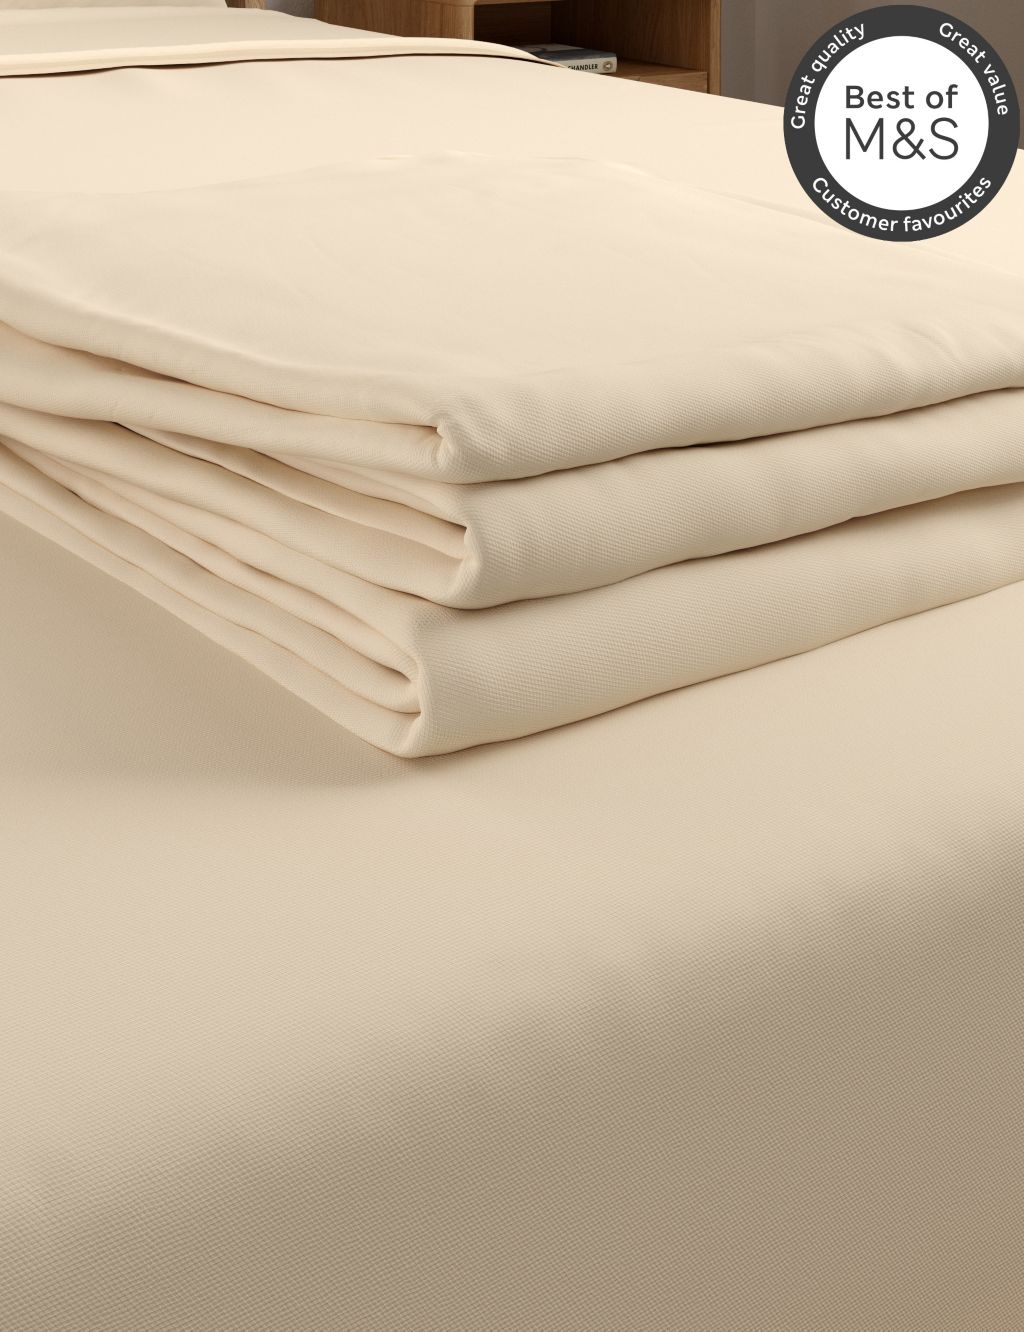 Egyptian Cotton 230 Thread Count Flat Sheet image 1